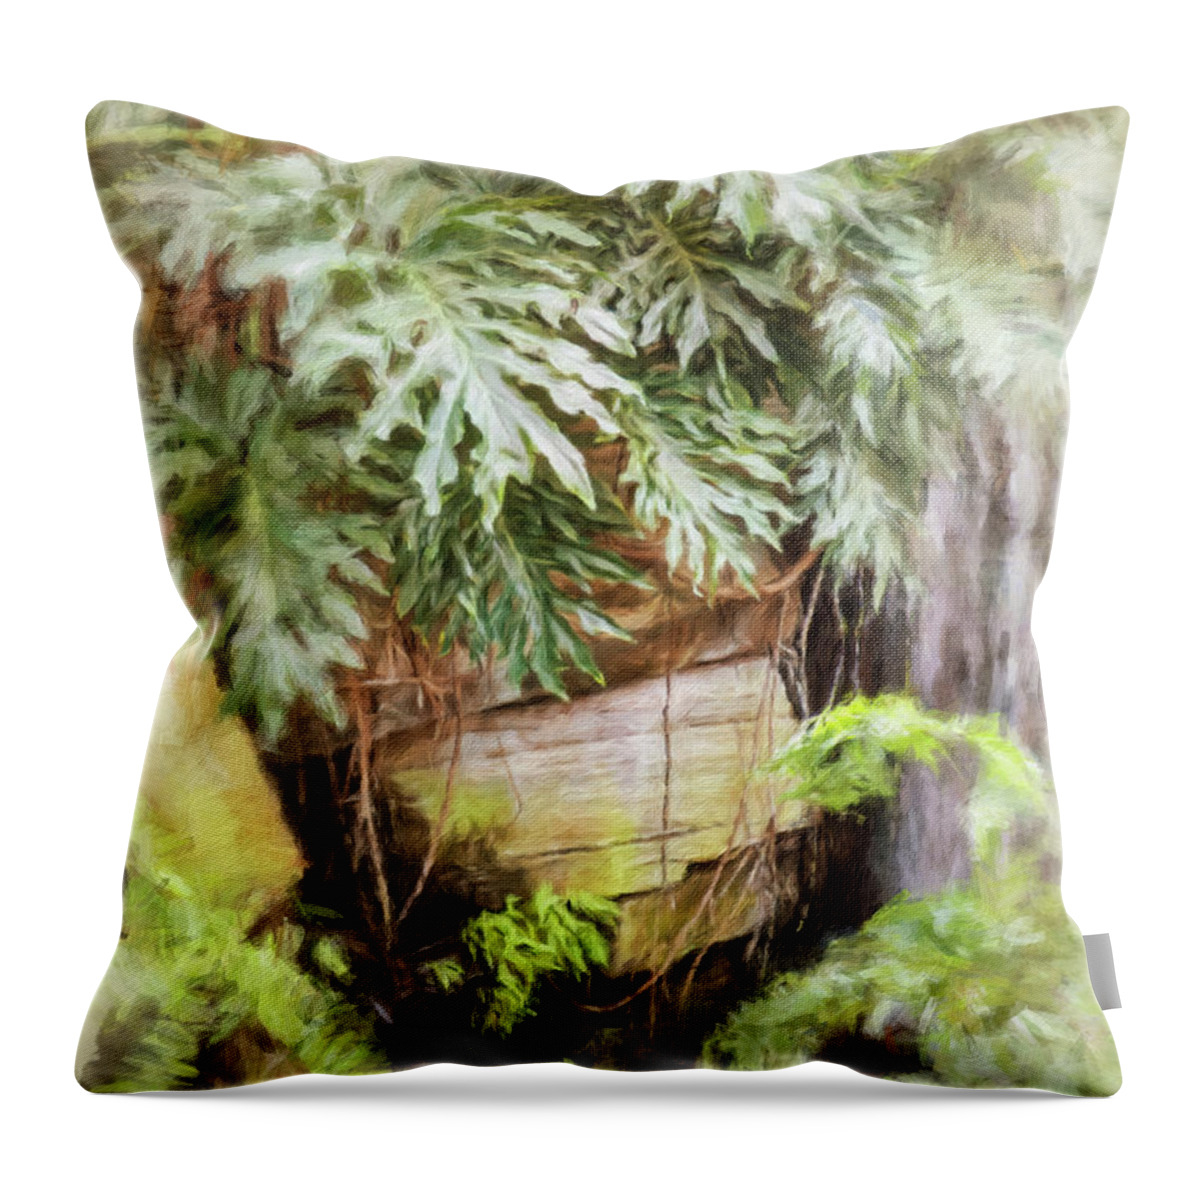 Tropical Throw Pillow featuring the photograph Welcome To The Jungle by Leslie Montgomery